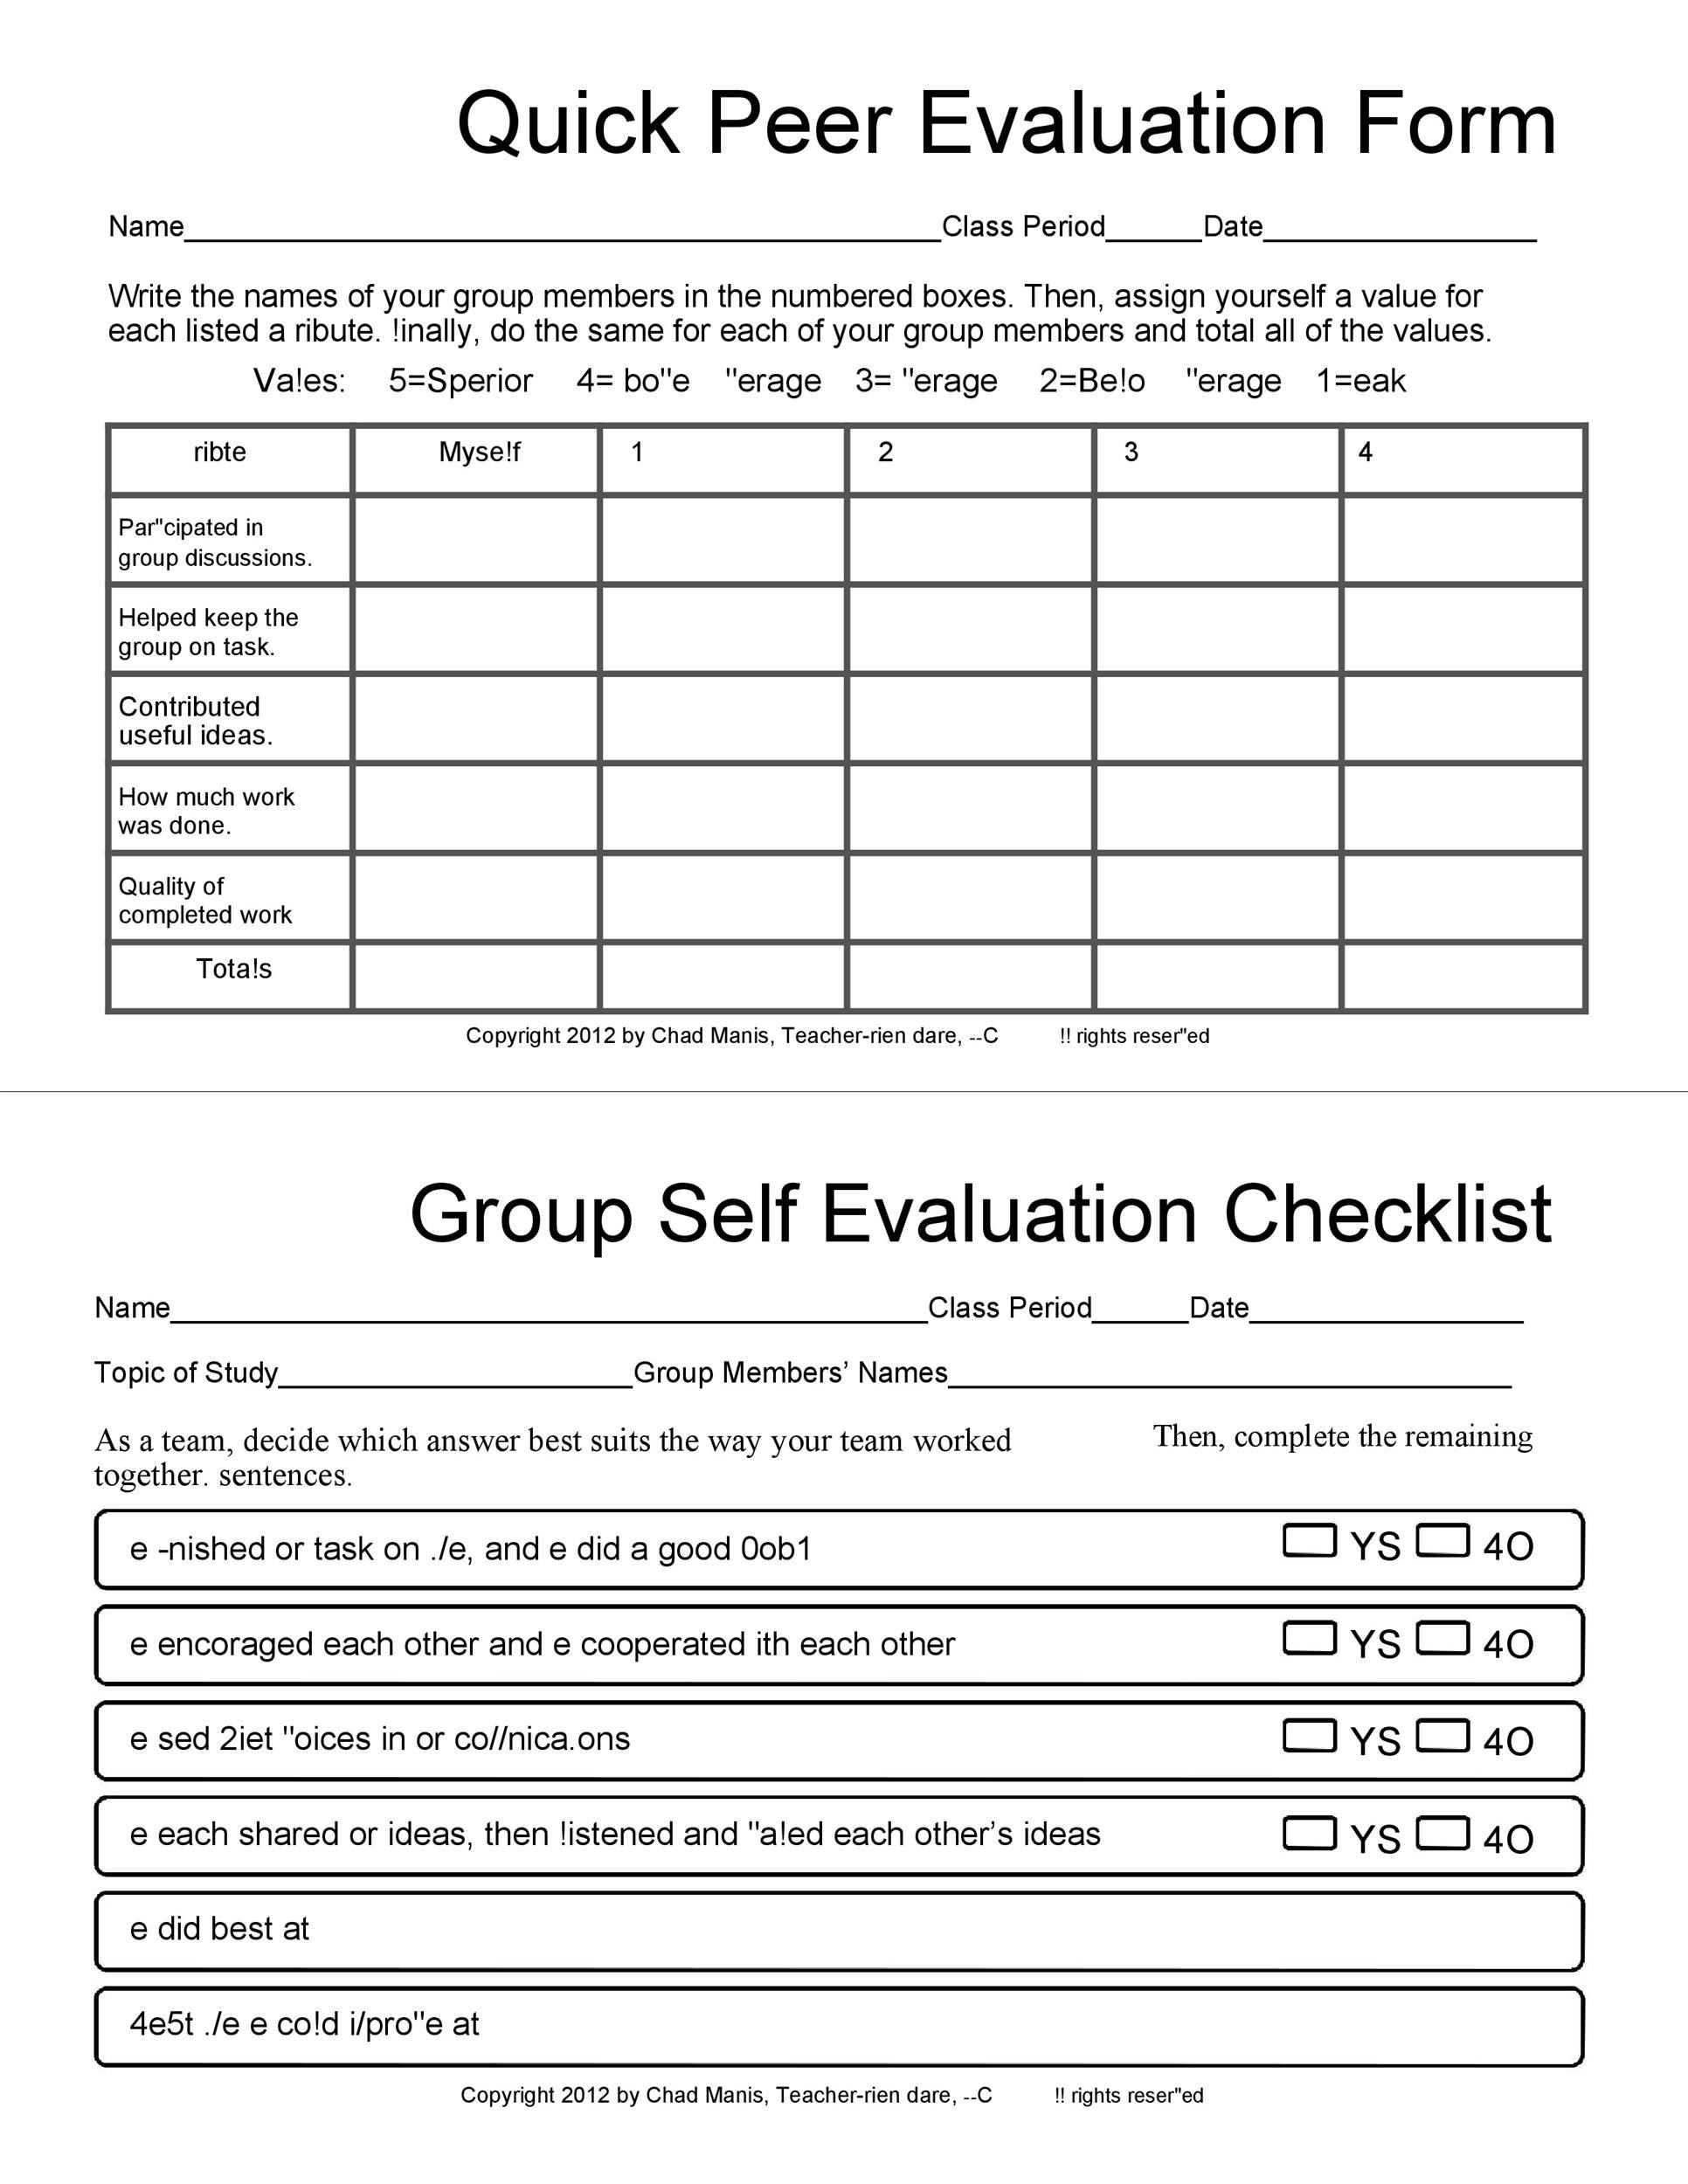 50-self-evaluation-examples-forms-questions-templatelab